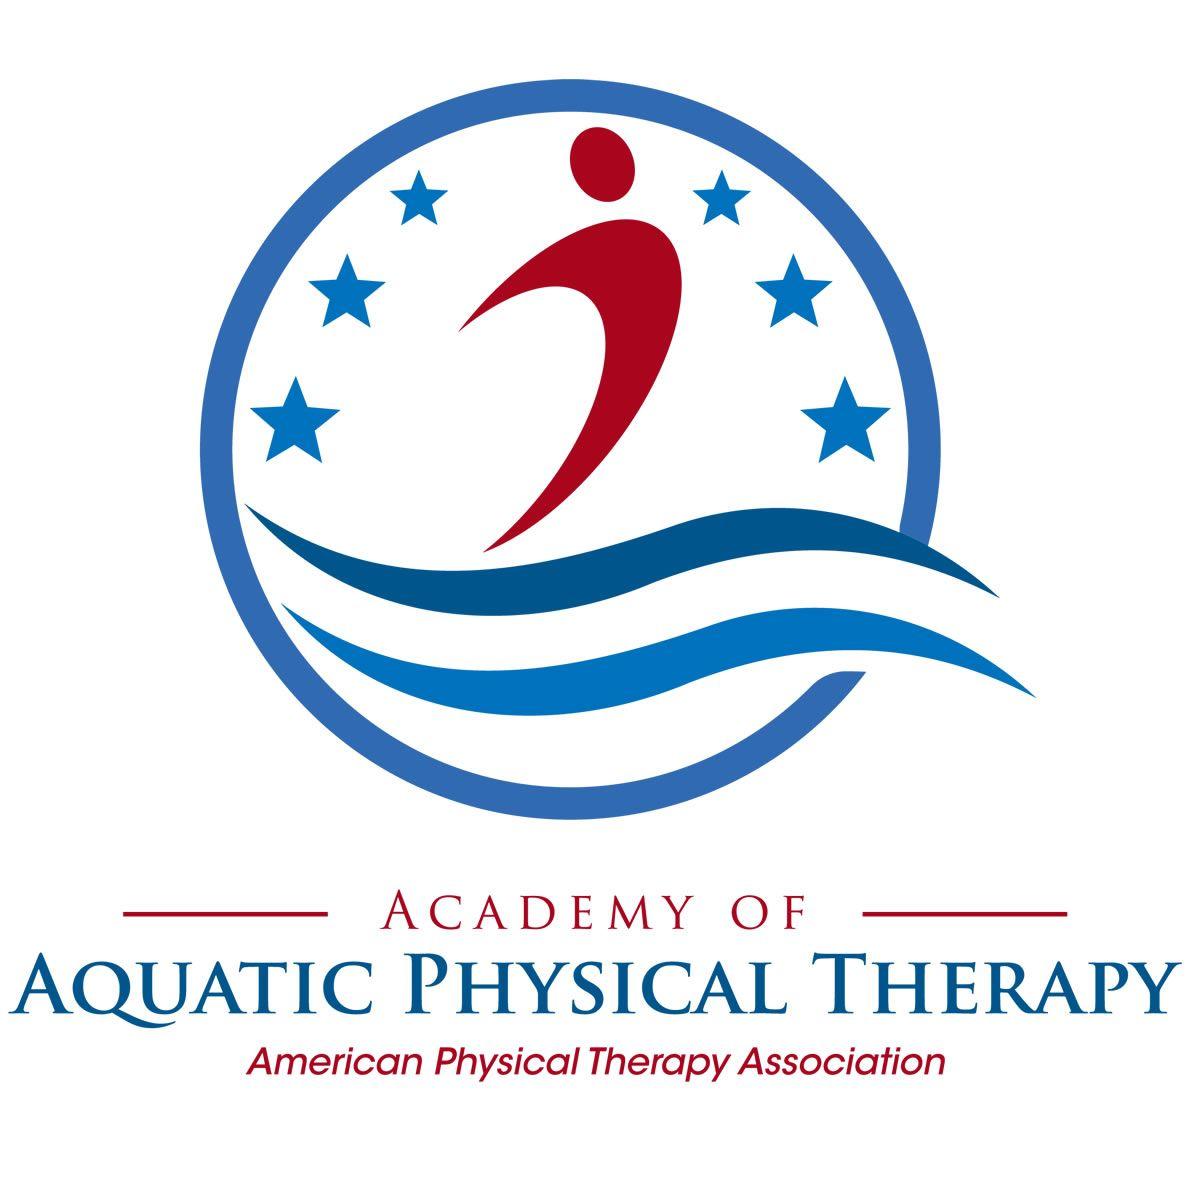 American Physical Therapy Association Logo - Academy of Aquatic Physical Therapy